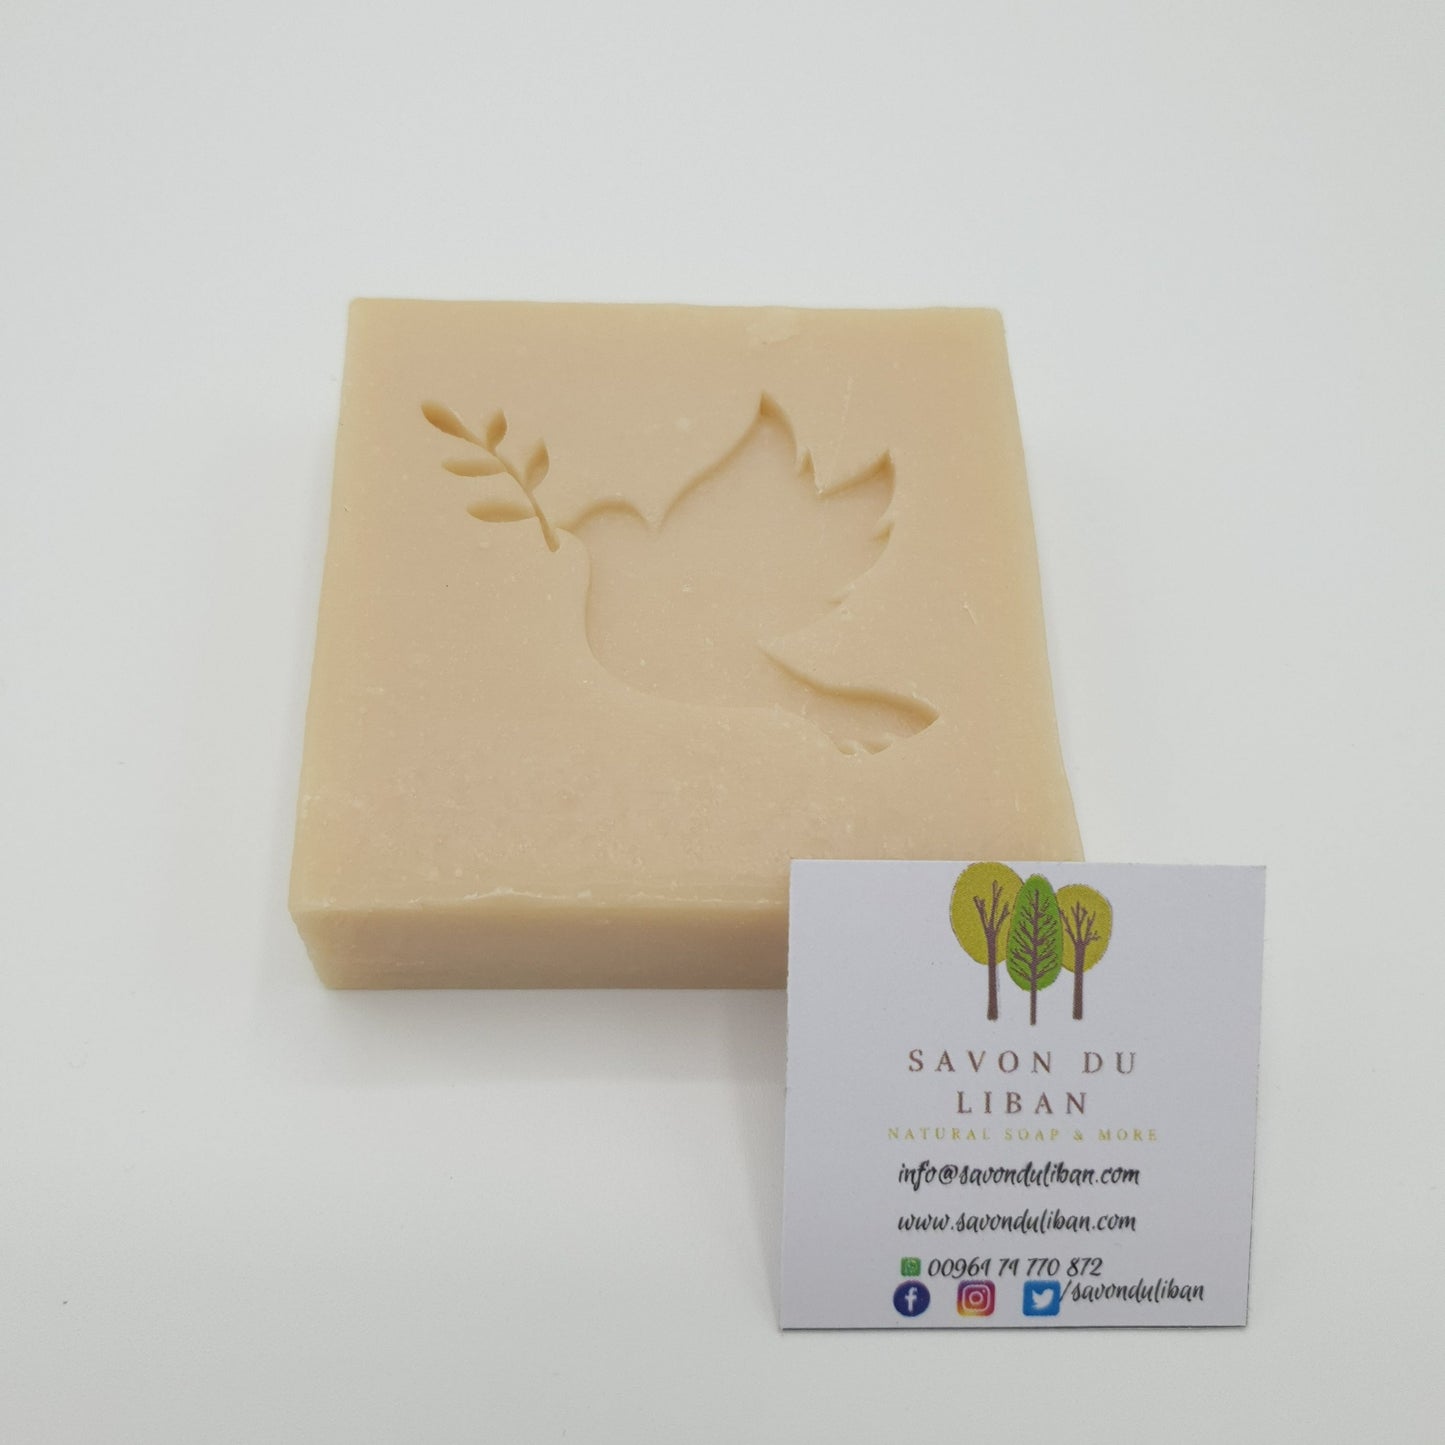 Natural Soap Bars from Lebanon - Stamped By Hand